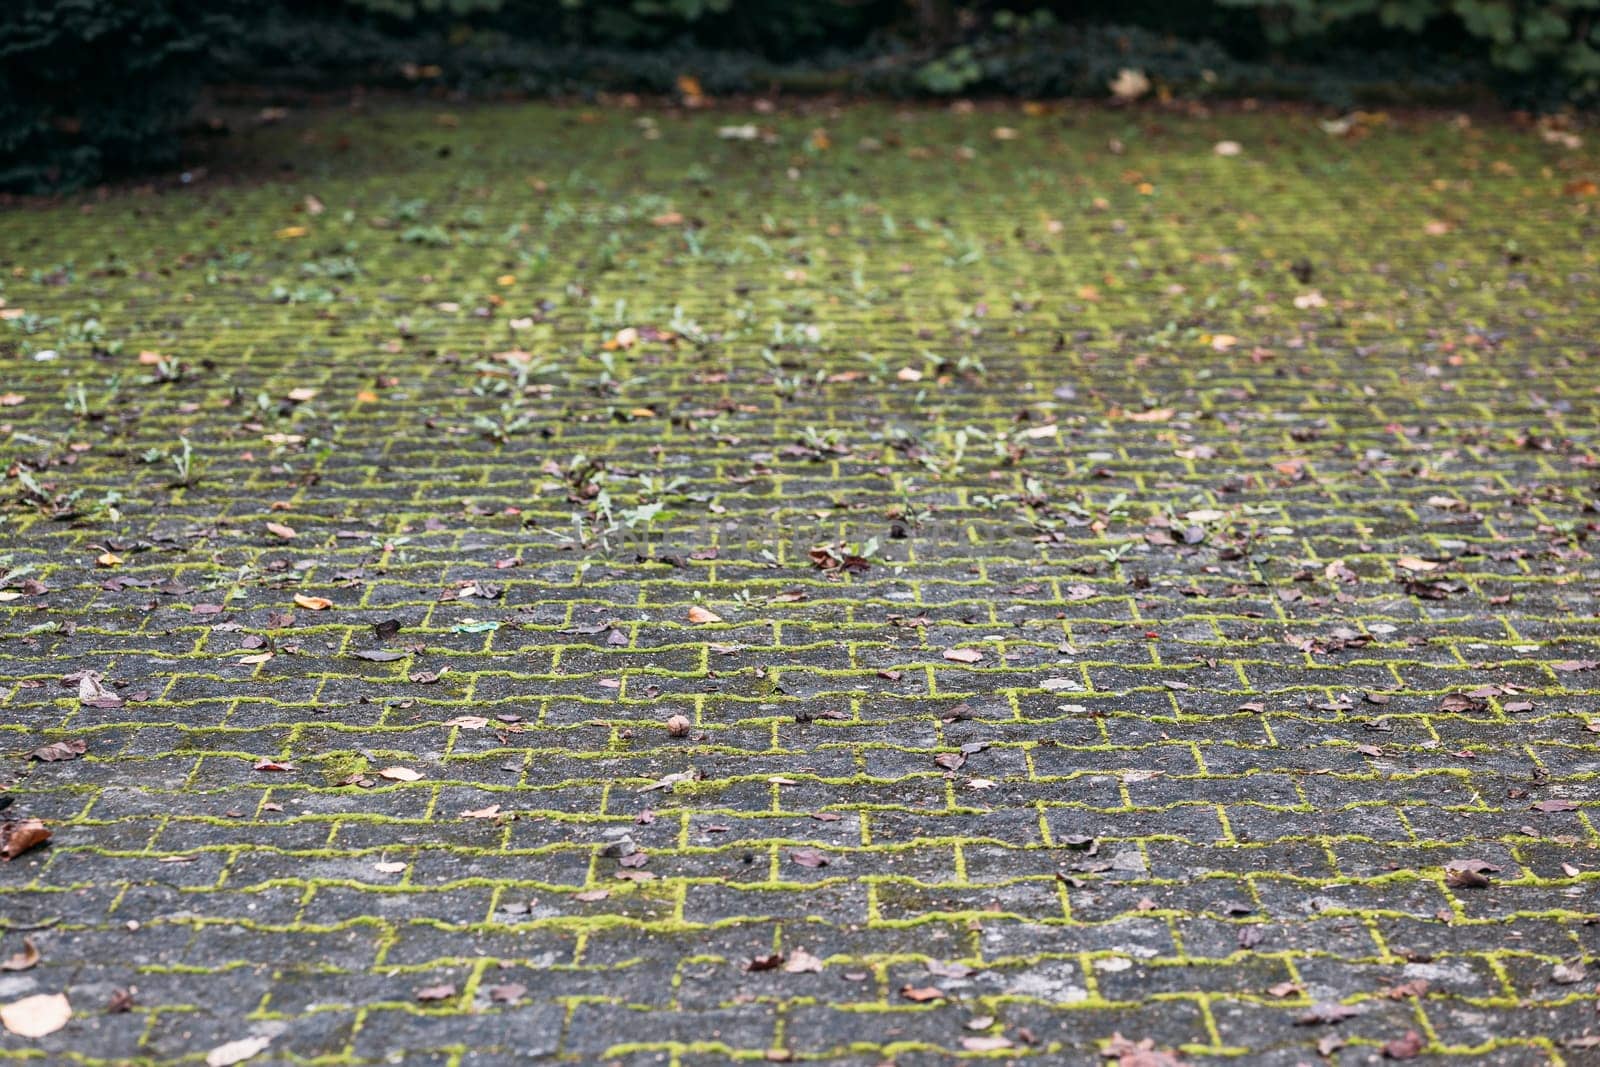 Paving stones with grass sprouting through cracks and joints by apavlin